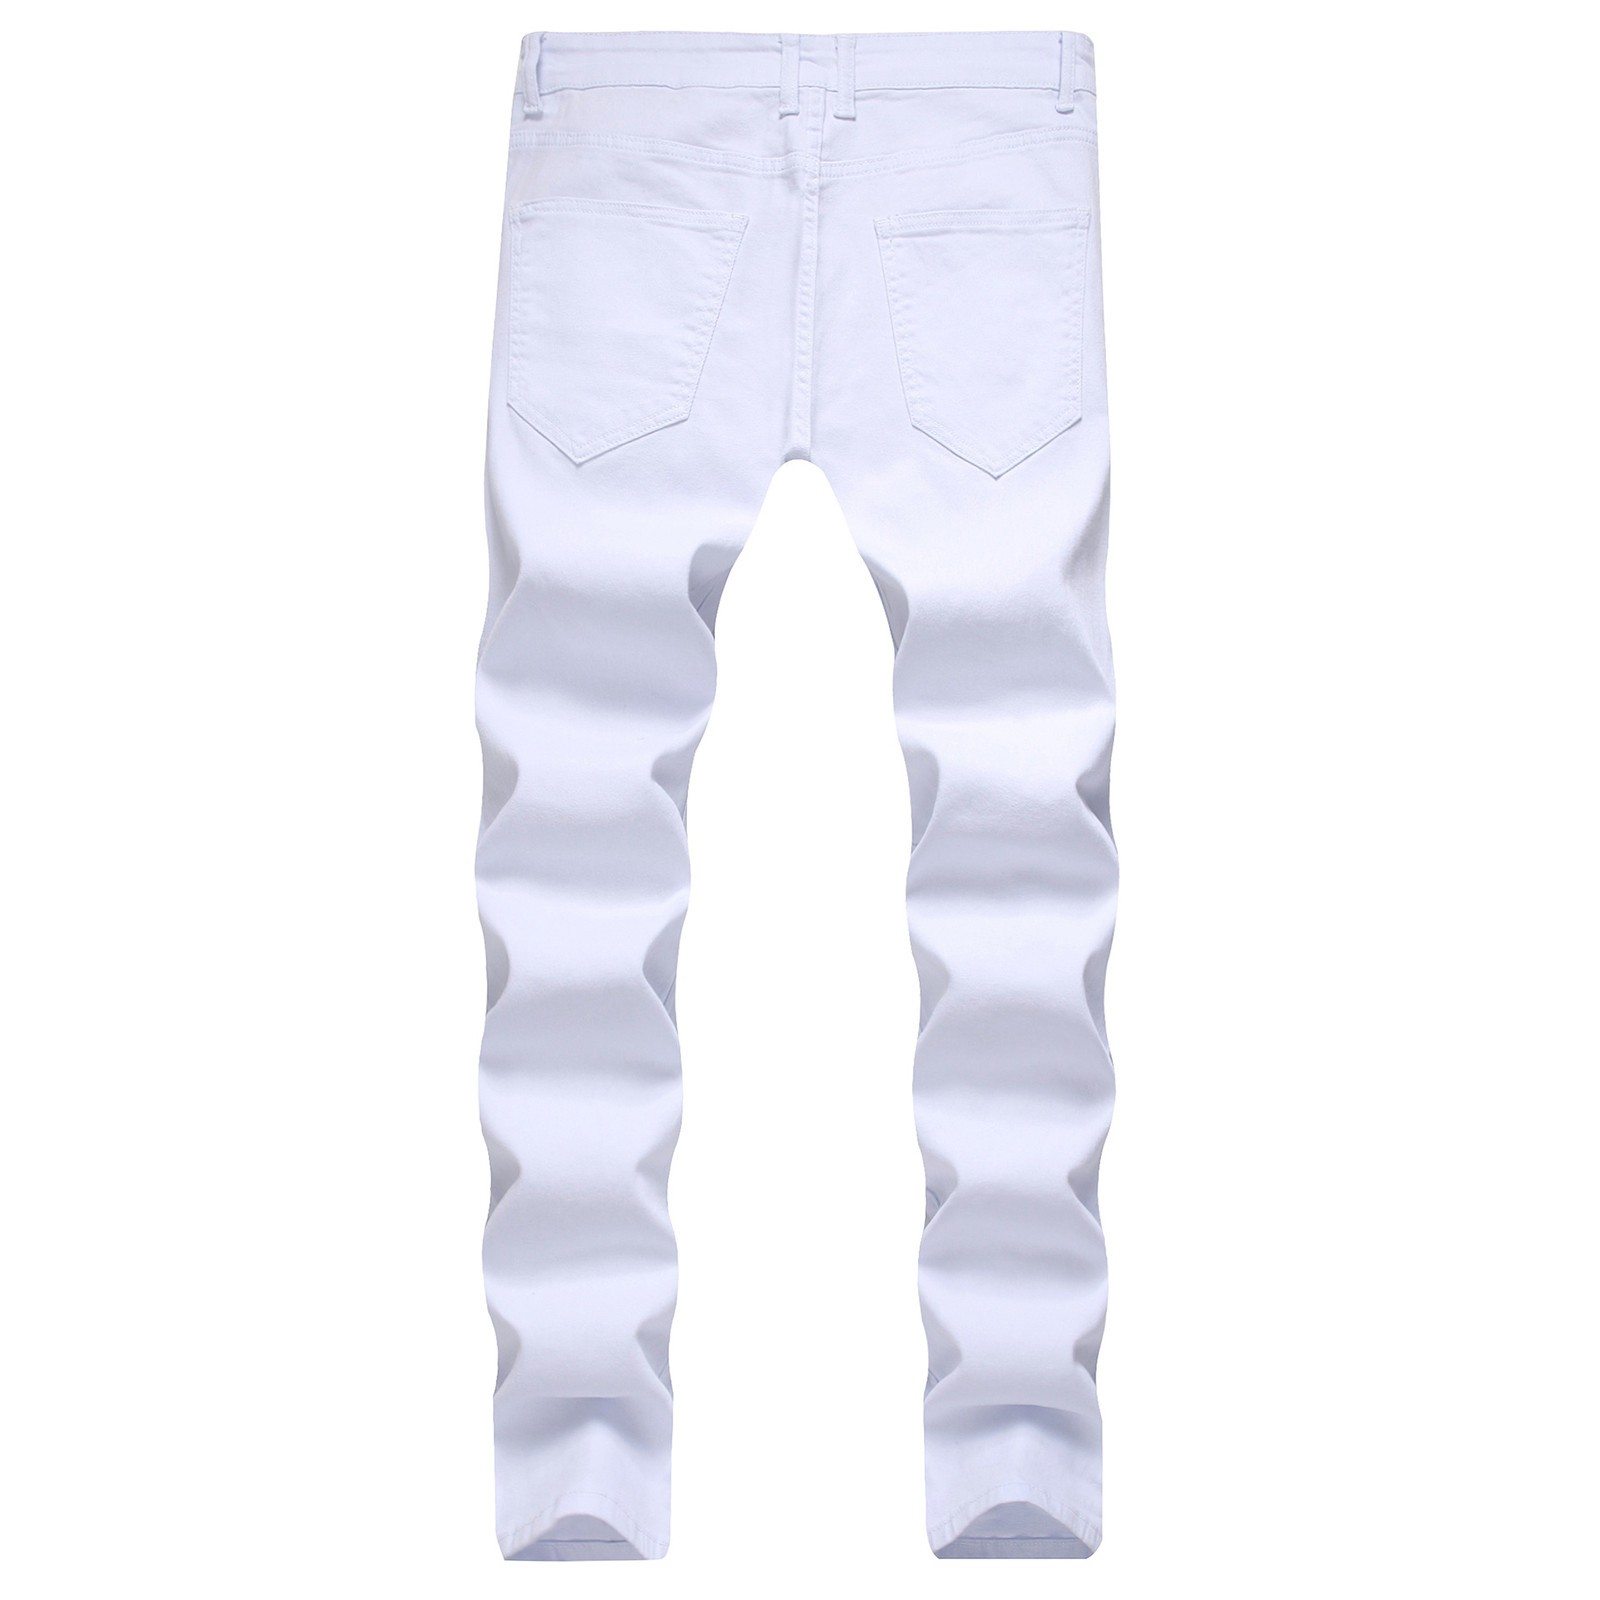 Pants for Men's Jeans Newly Slim Ripped Hip-hop Stretch Denim Cargo Pants Motorcycle Capri Trouse Pencil Pants - image 4 of 4